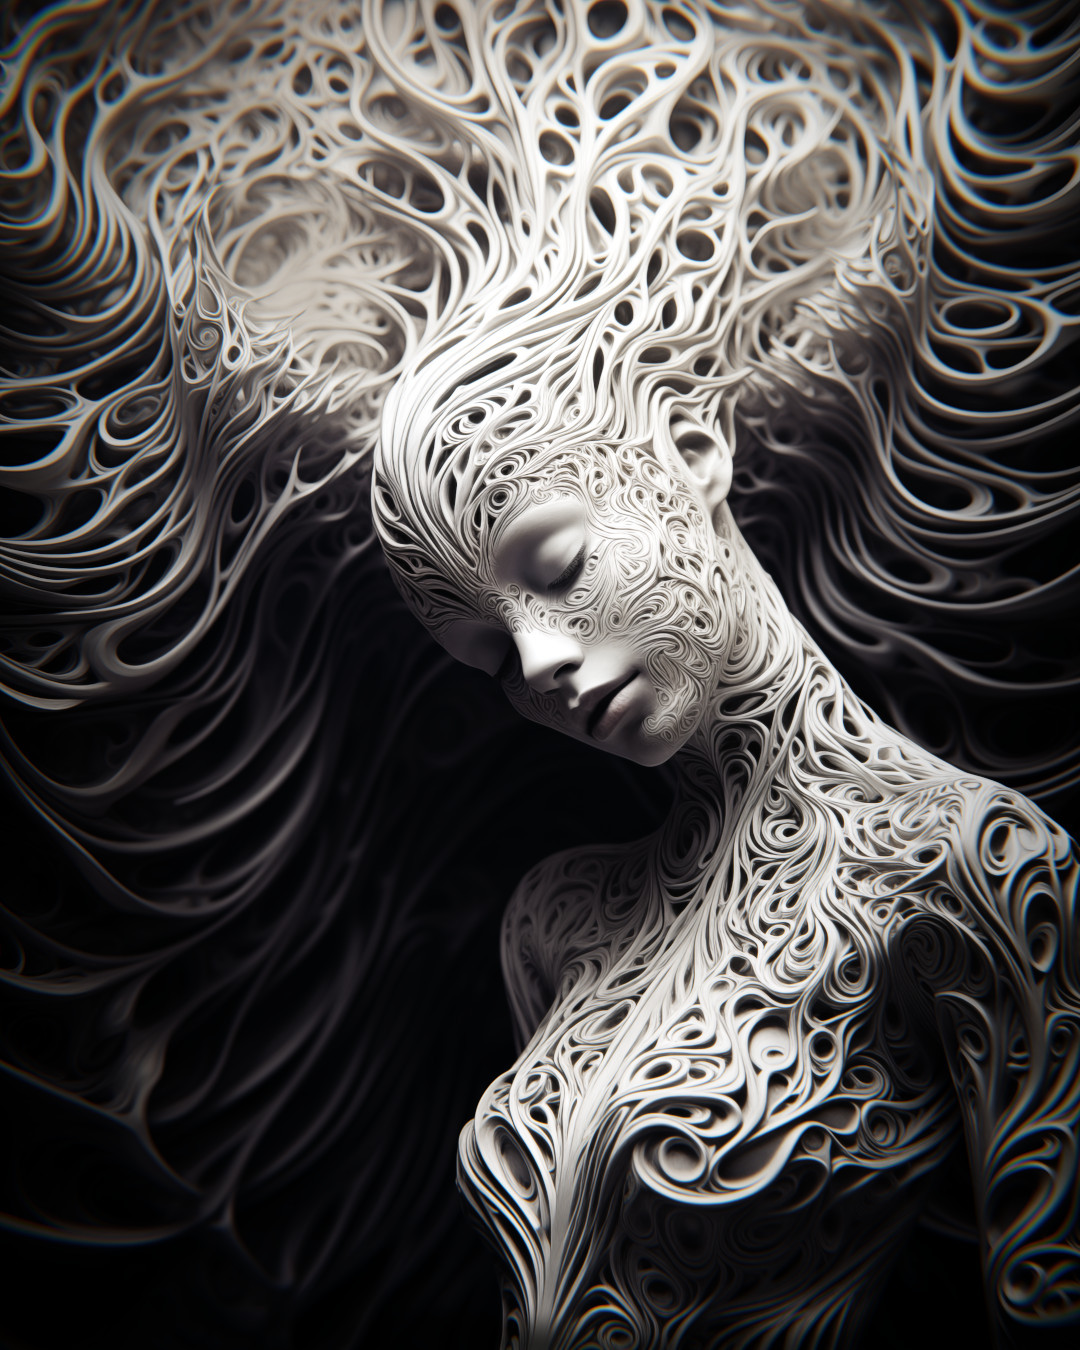 Woman with long hair, organic flowing lines, dark and intricate